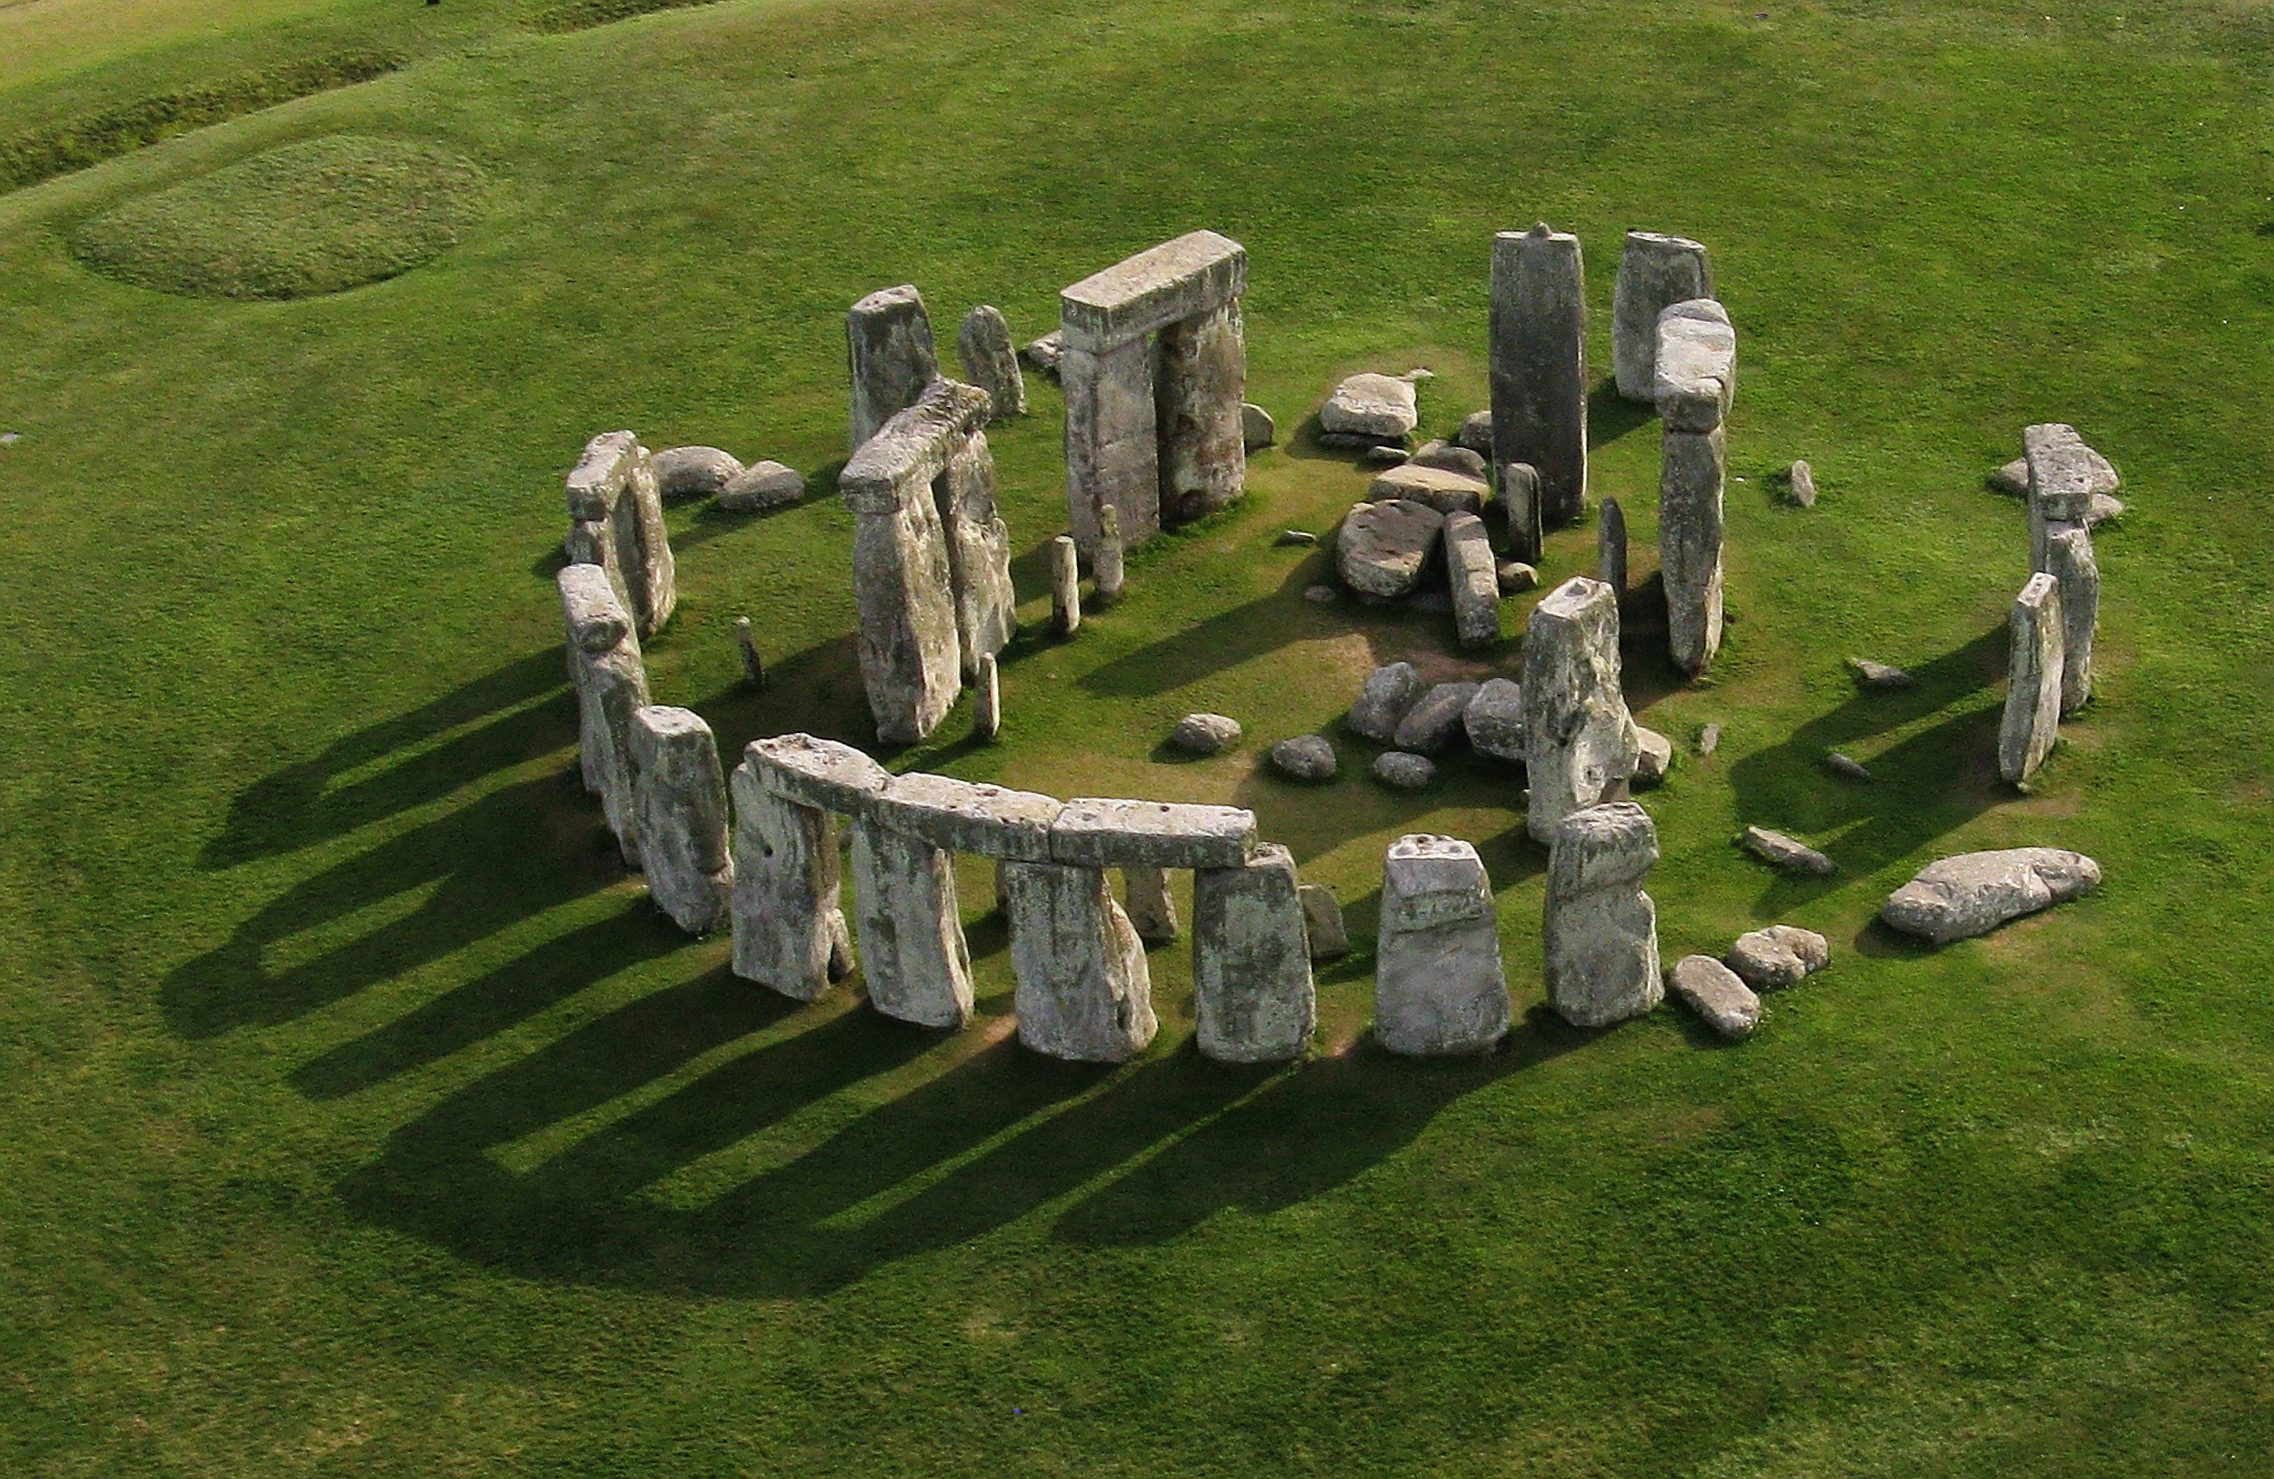 2274x1479 How Old Is Stonehenge? And Why Was It Built? Read Our Expert Guide, Plus 12 Important Facts | HistoryExtra